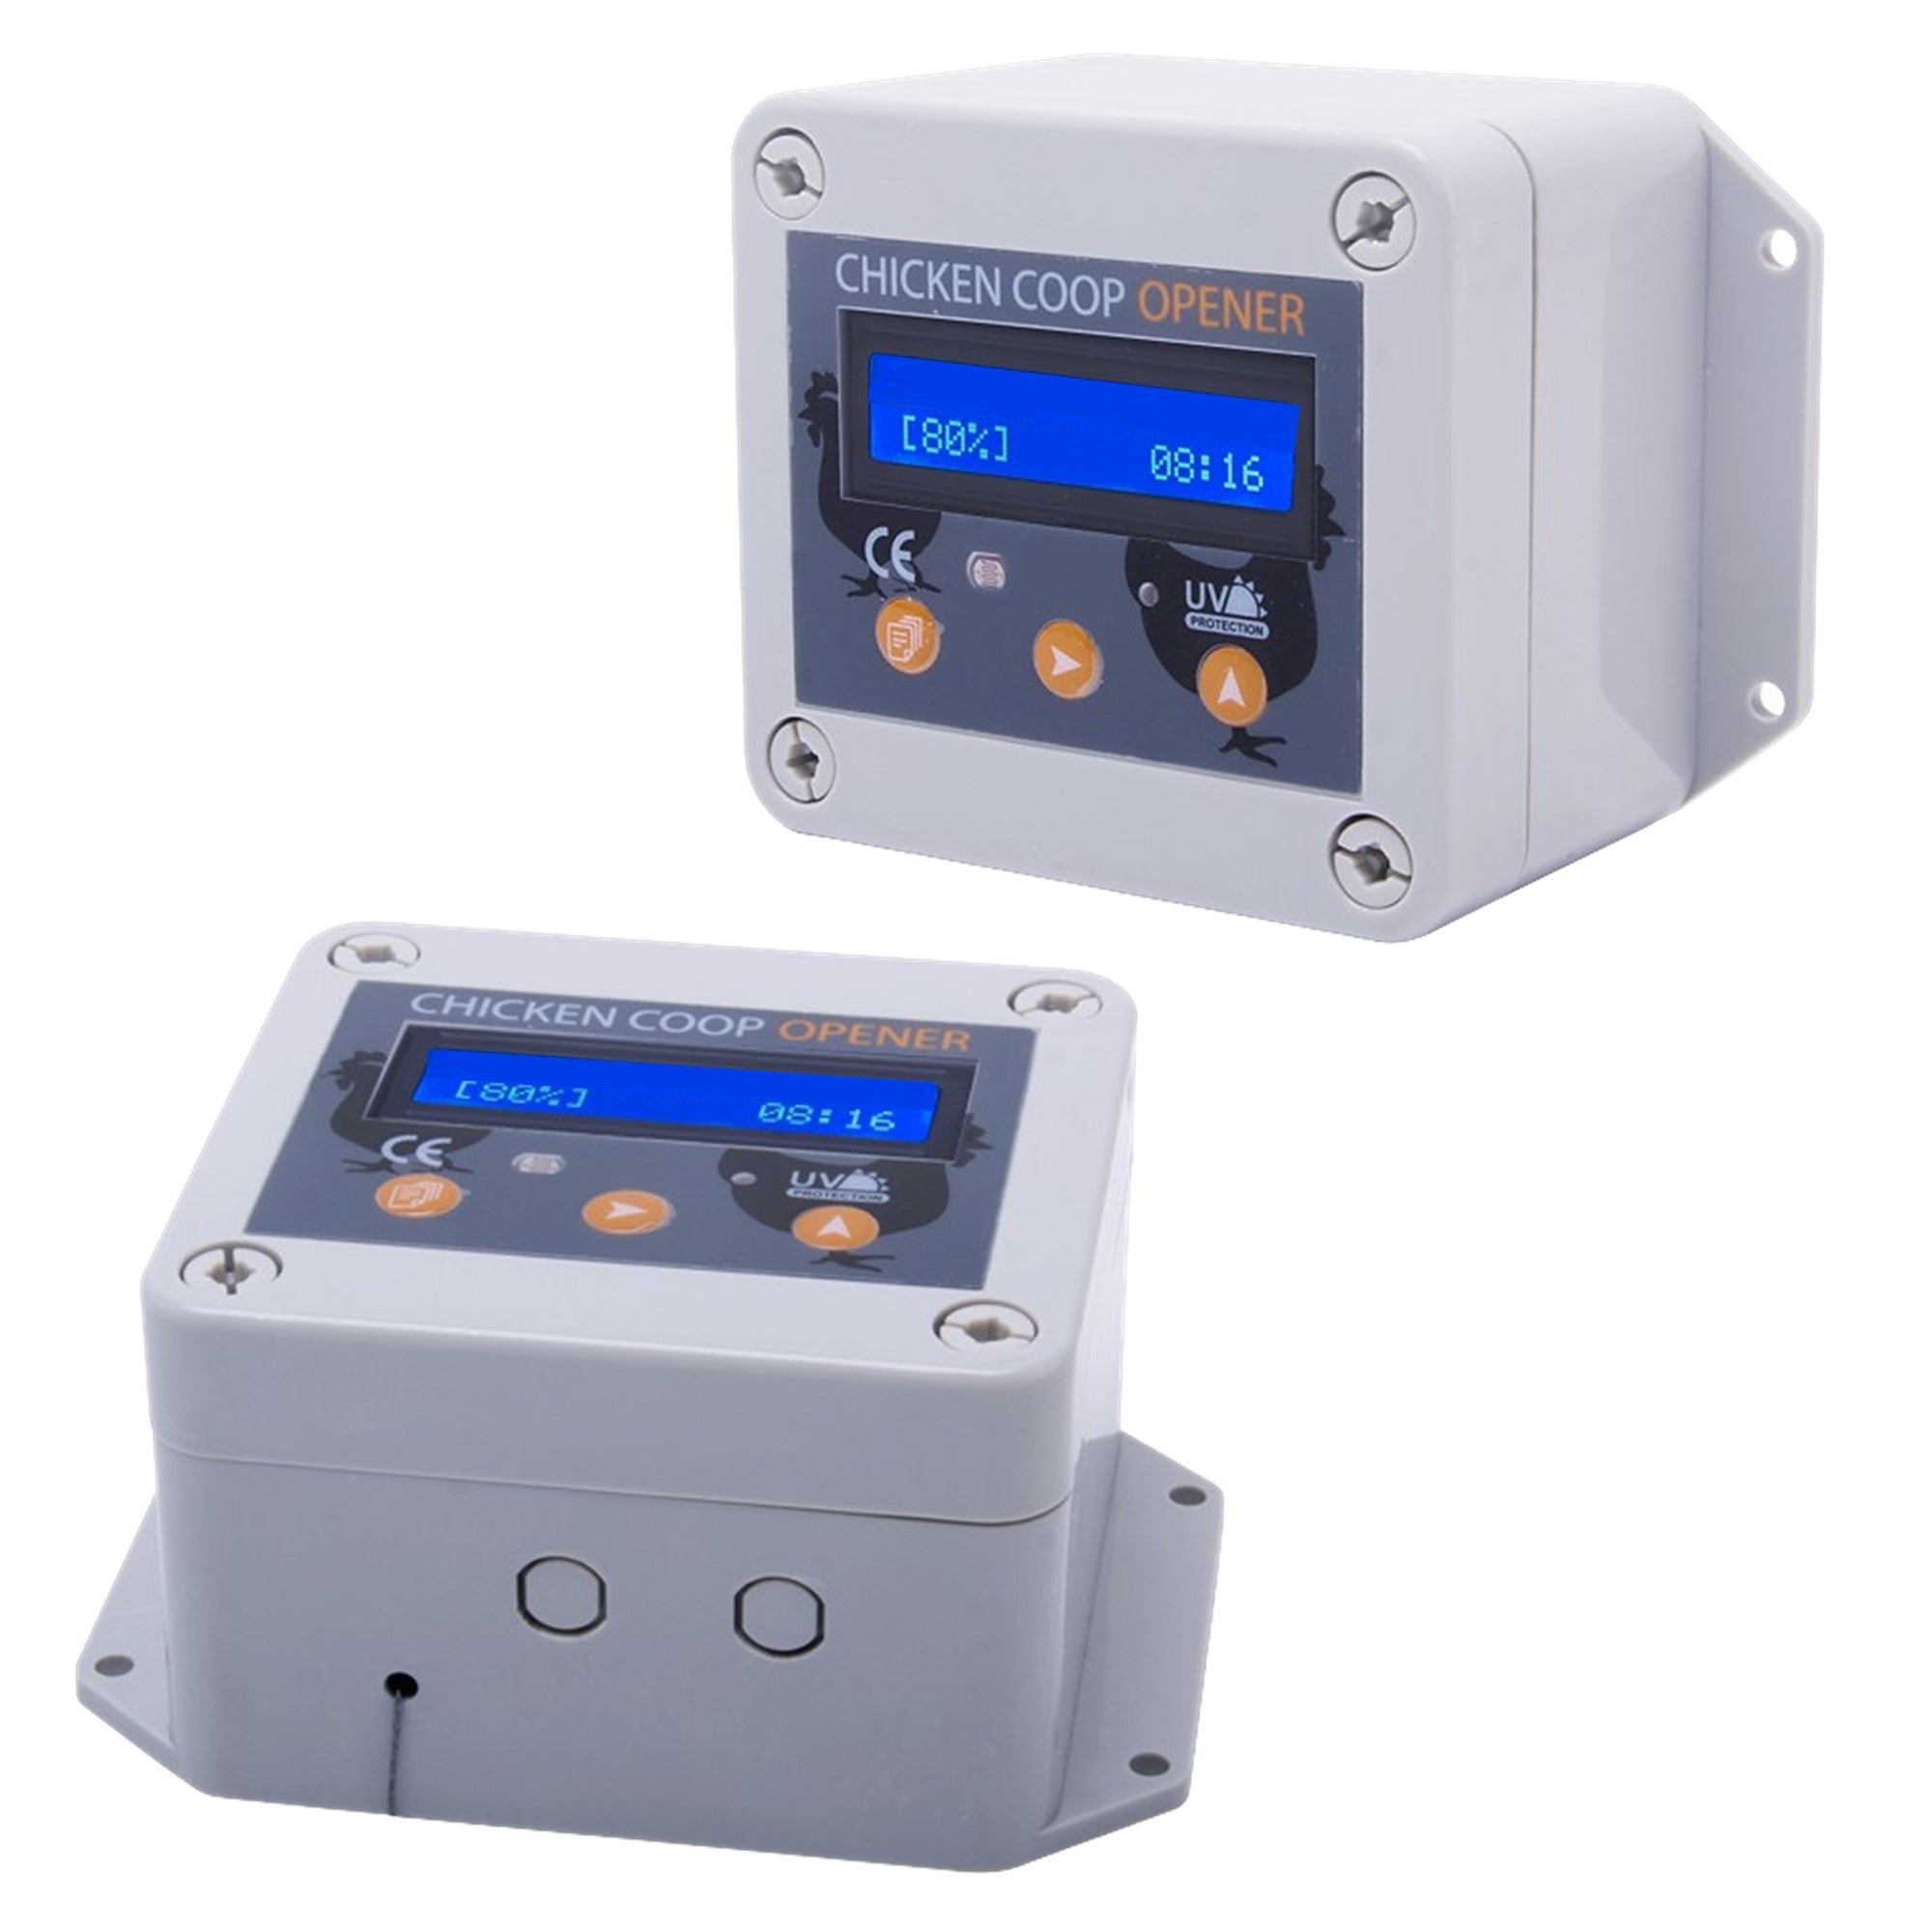 Easy to Use - Integrated fully-featured LCD screen. Open in the morning & close in the evening automatically by setting the timer or using the easily adjusted light sensor.